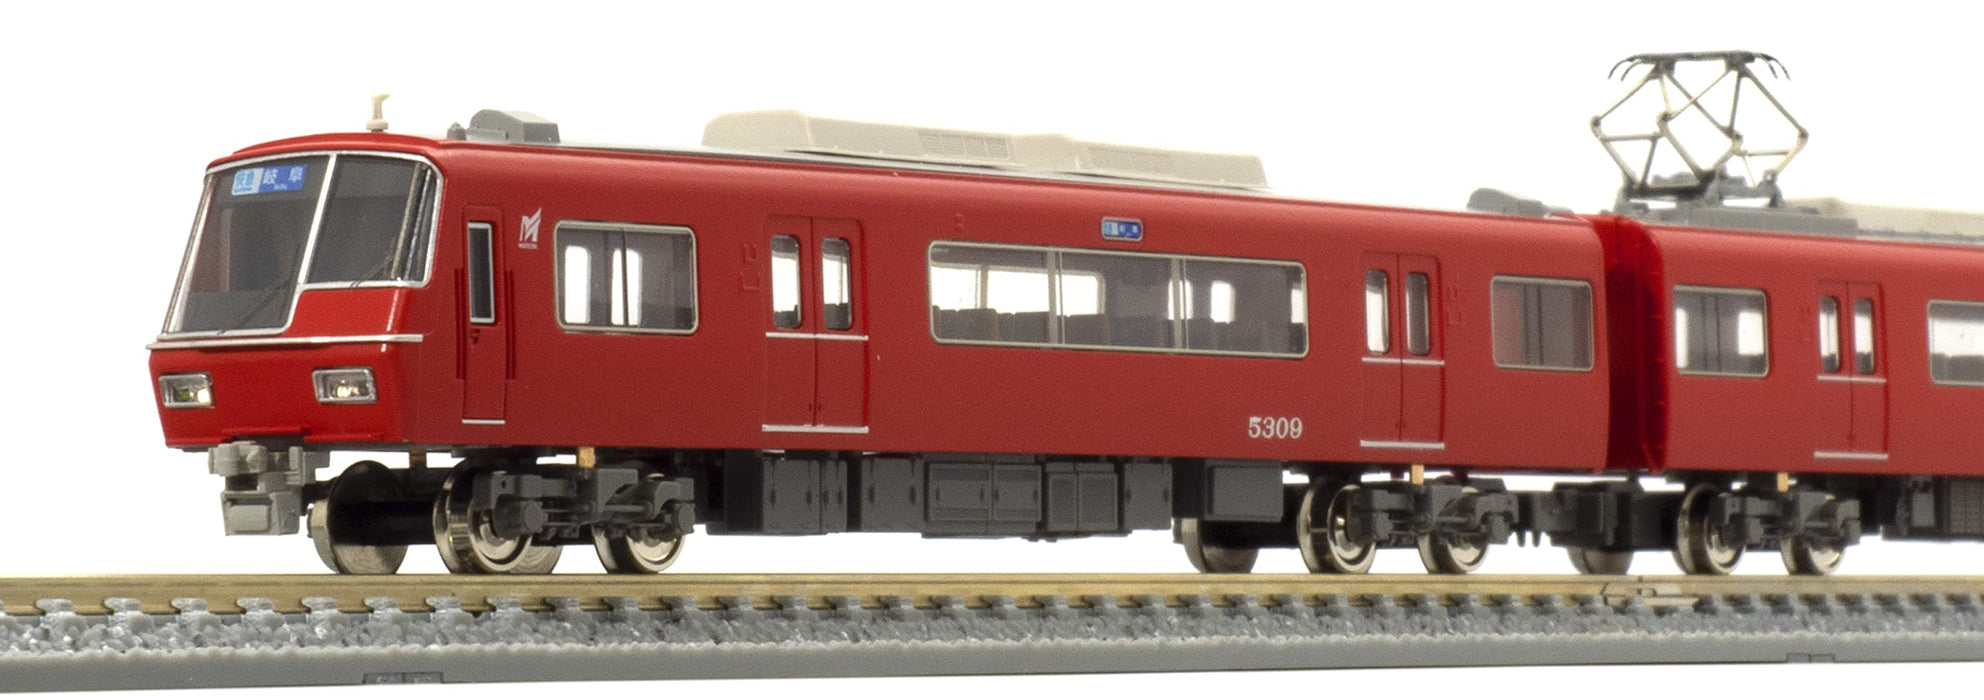 GREENMAX 31543 Meitetsu Series 5300 5309 Configuration 2 Cars Add-On Set N Scale